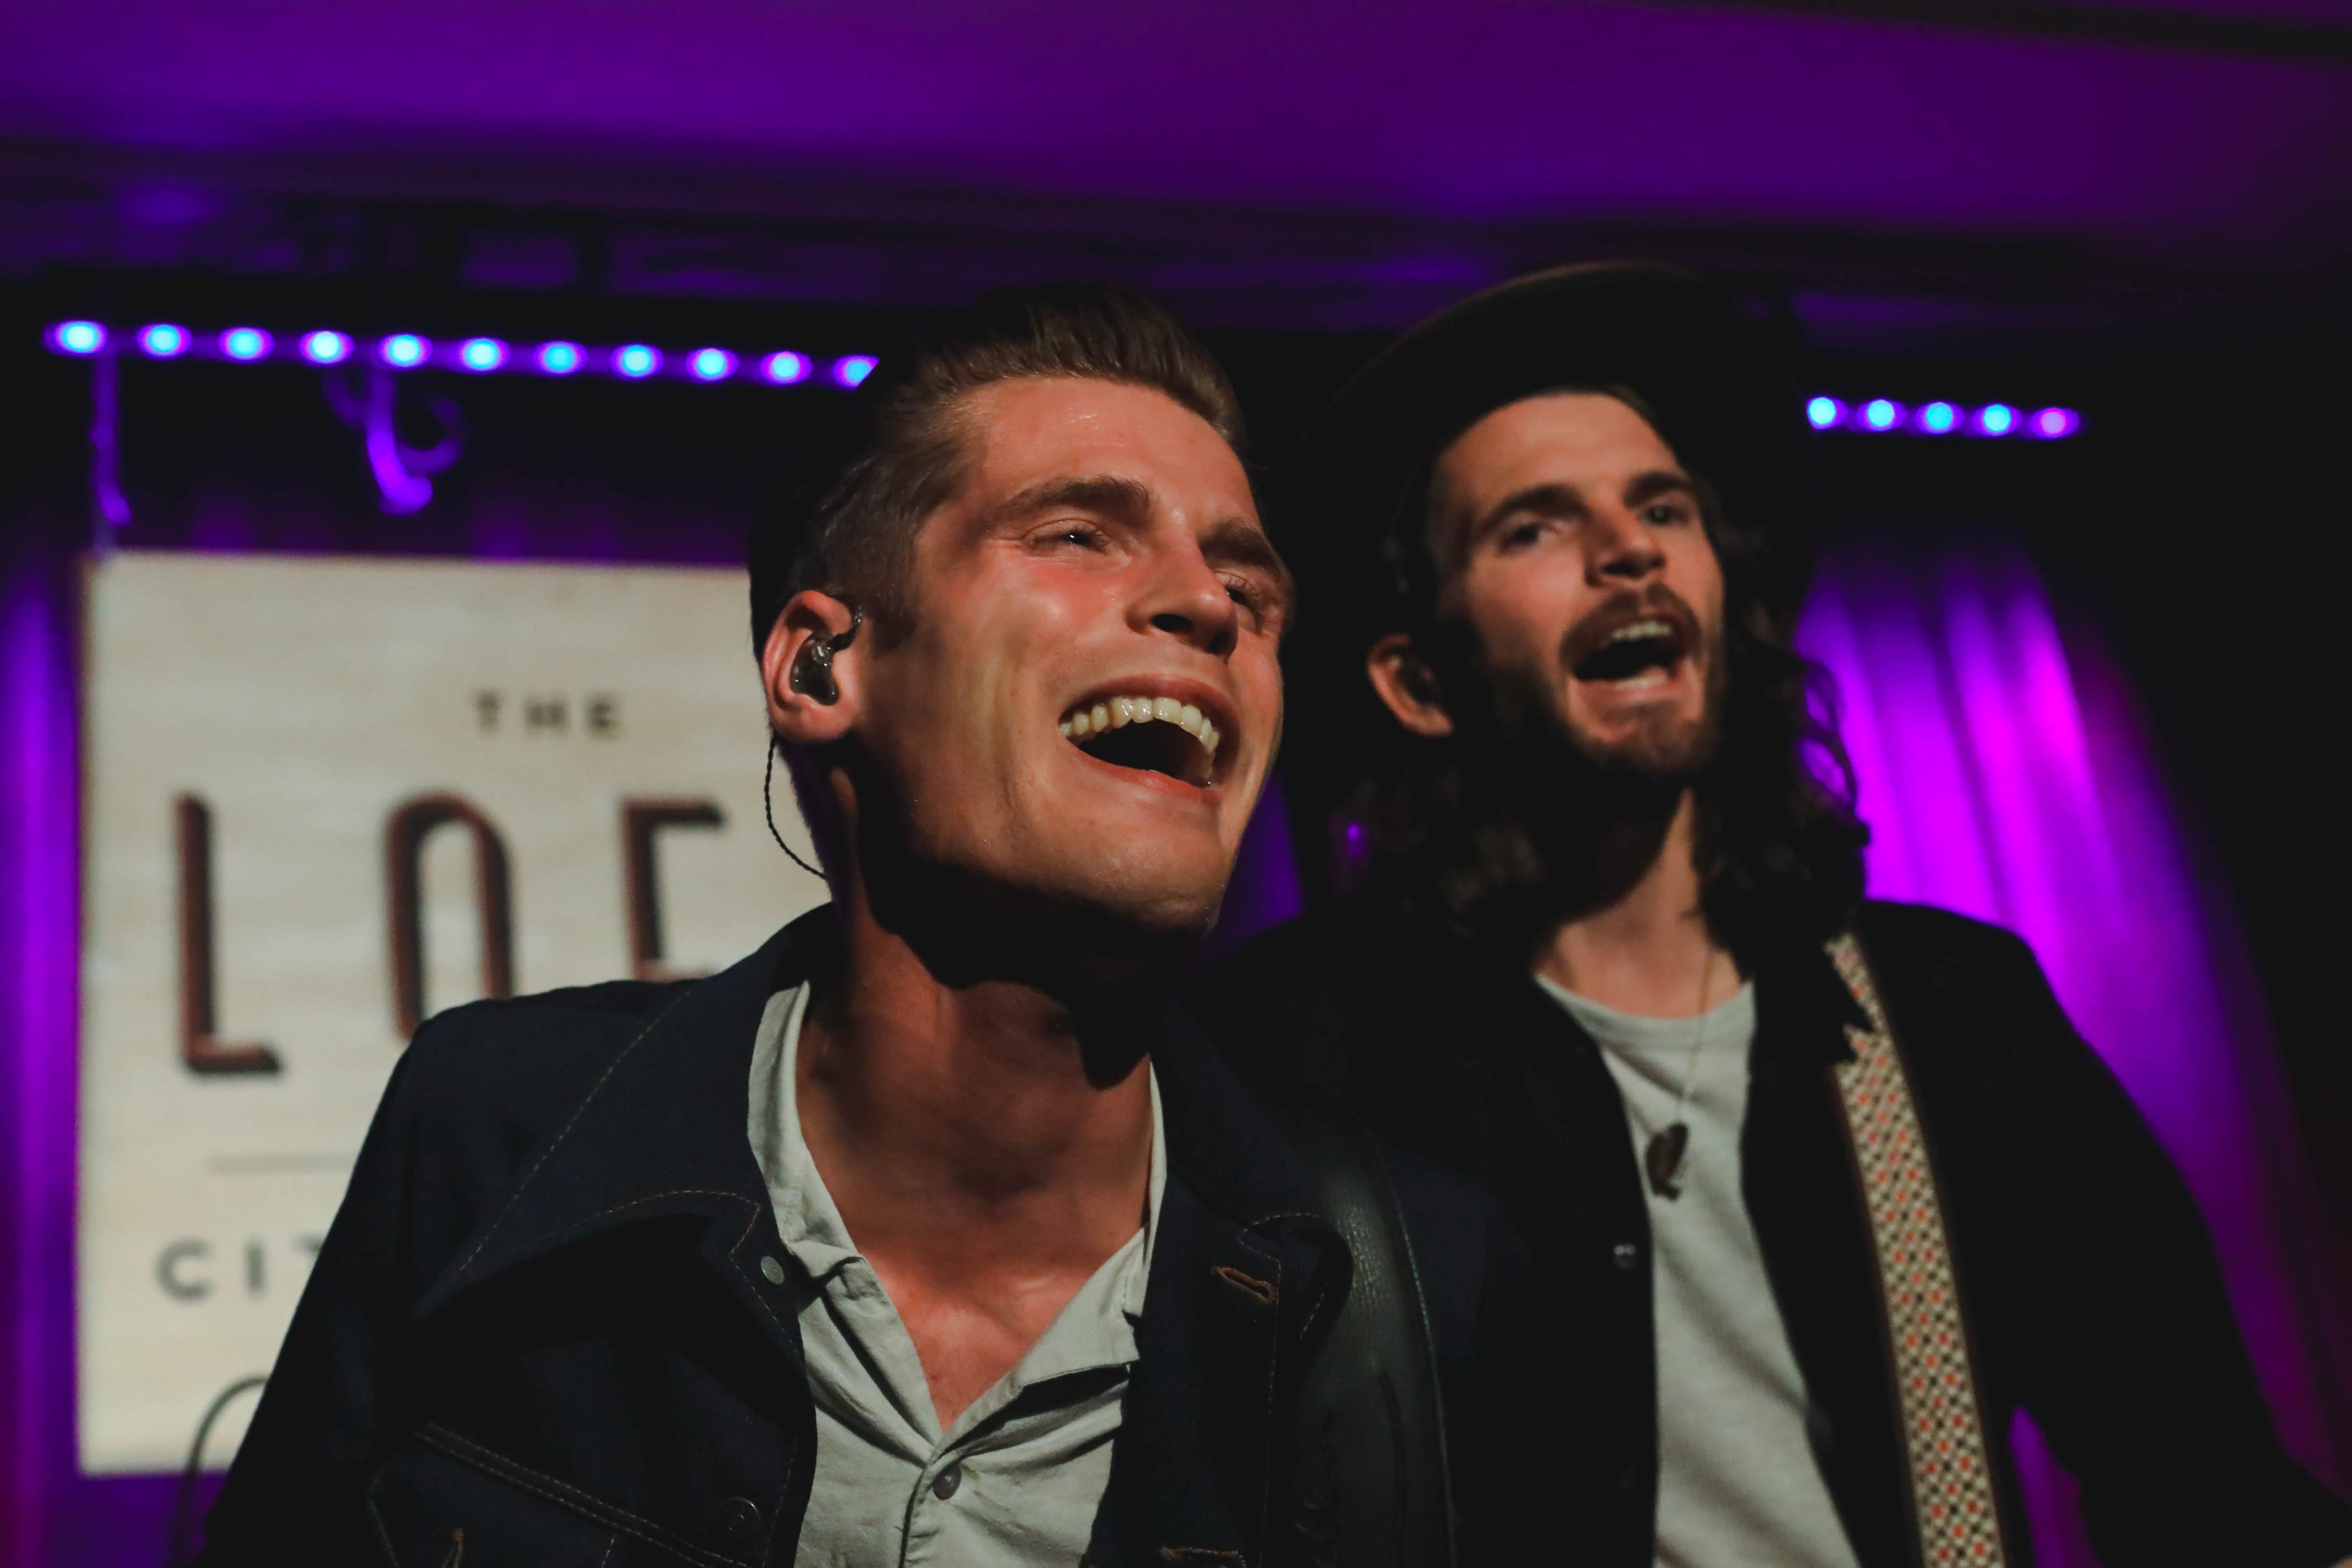 HUDSON TAYLOR RETURNS TO NYC AFTER SOLD-OUT SEPTEMBER RUN